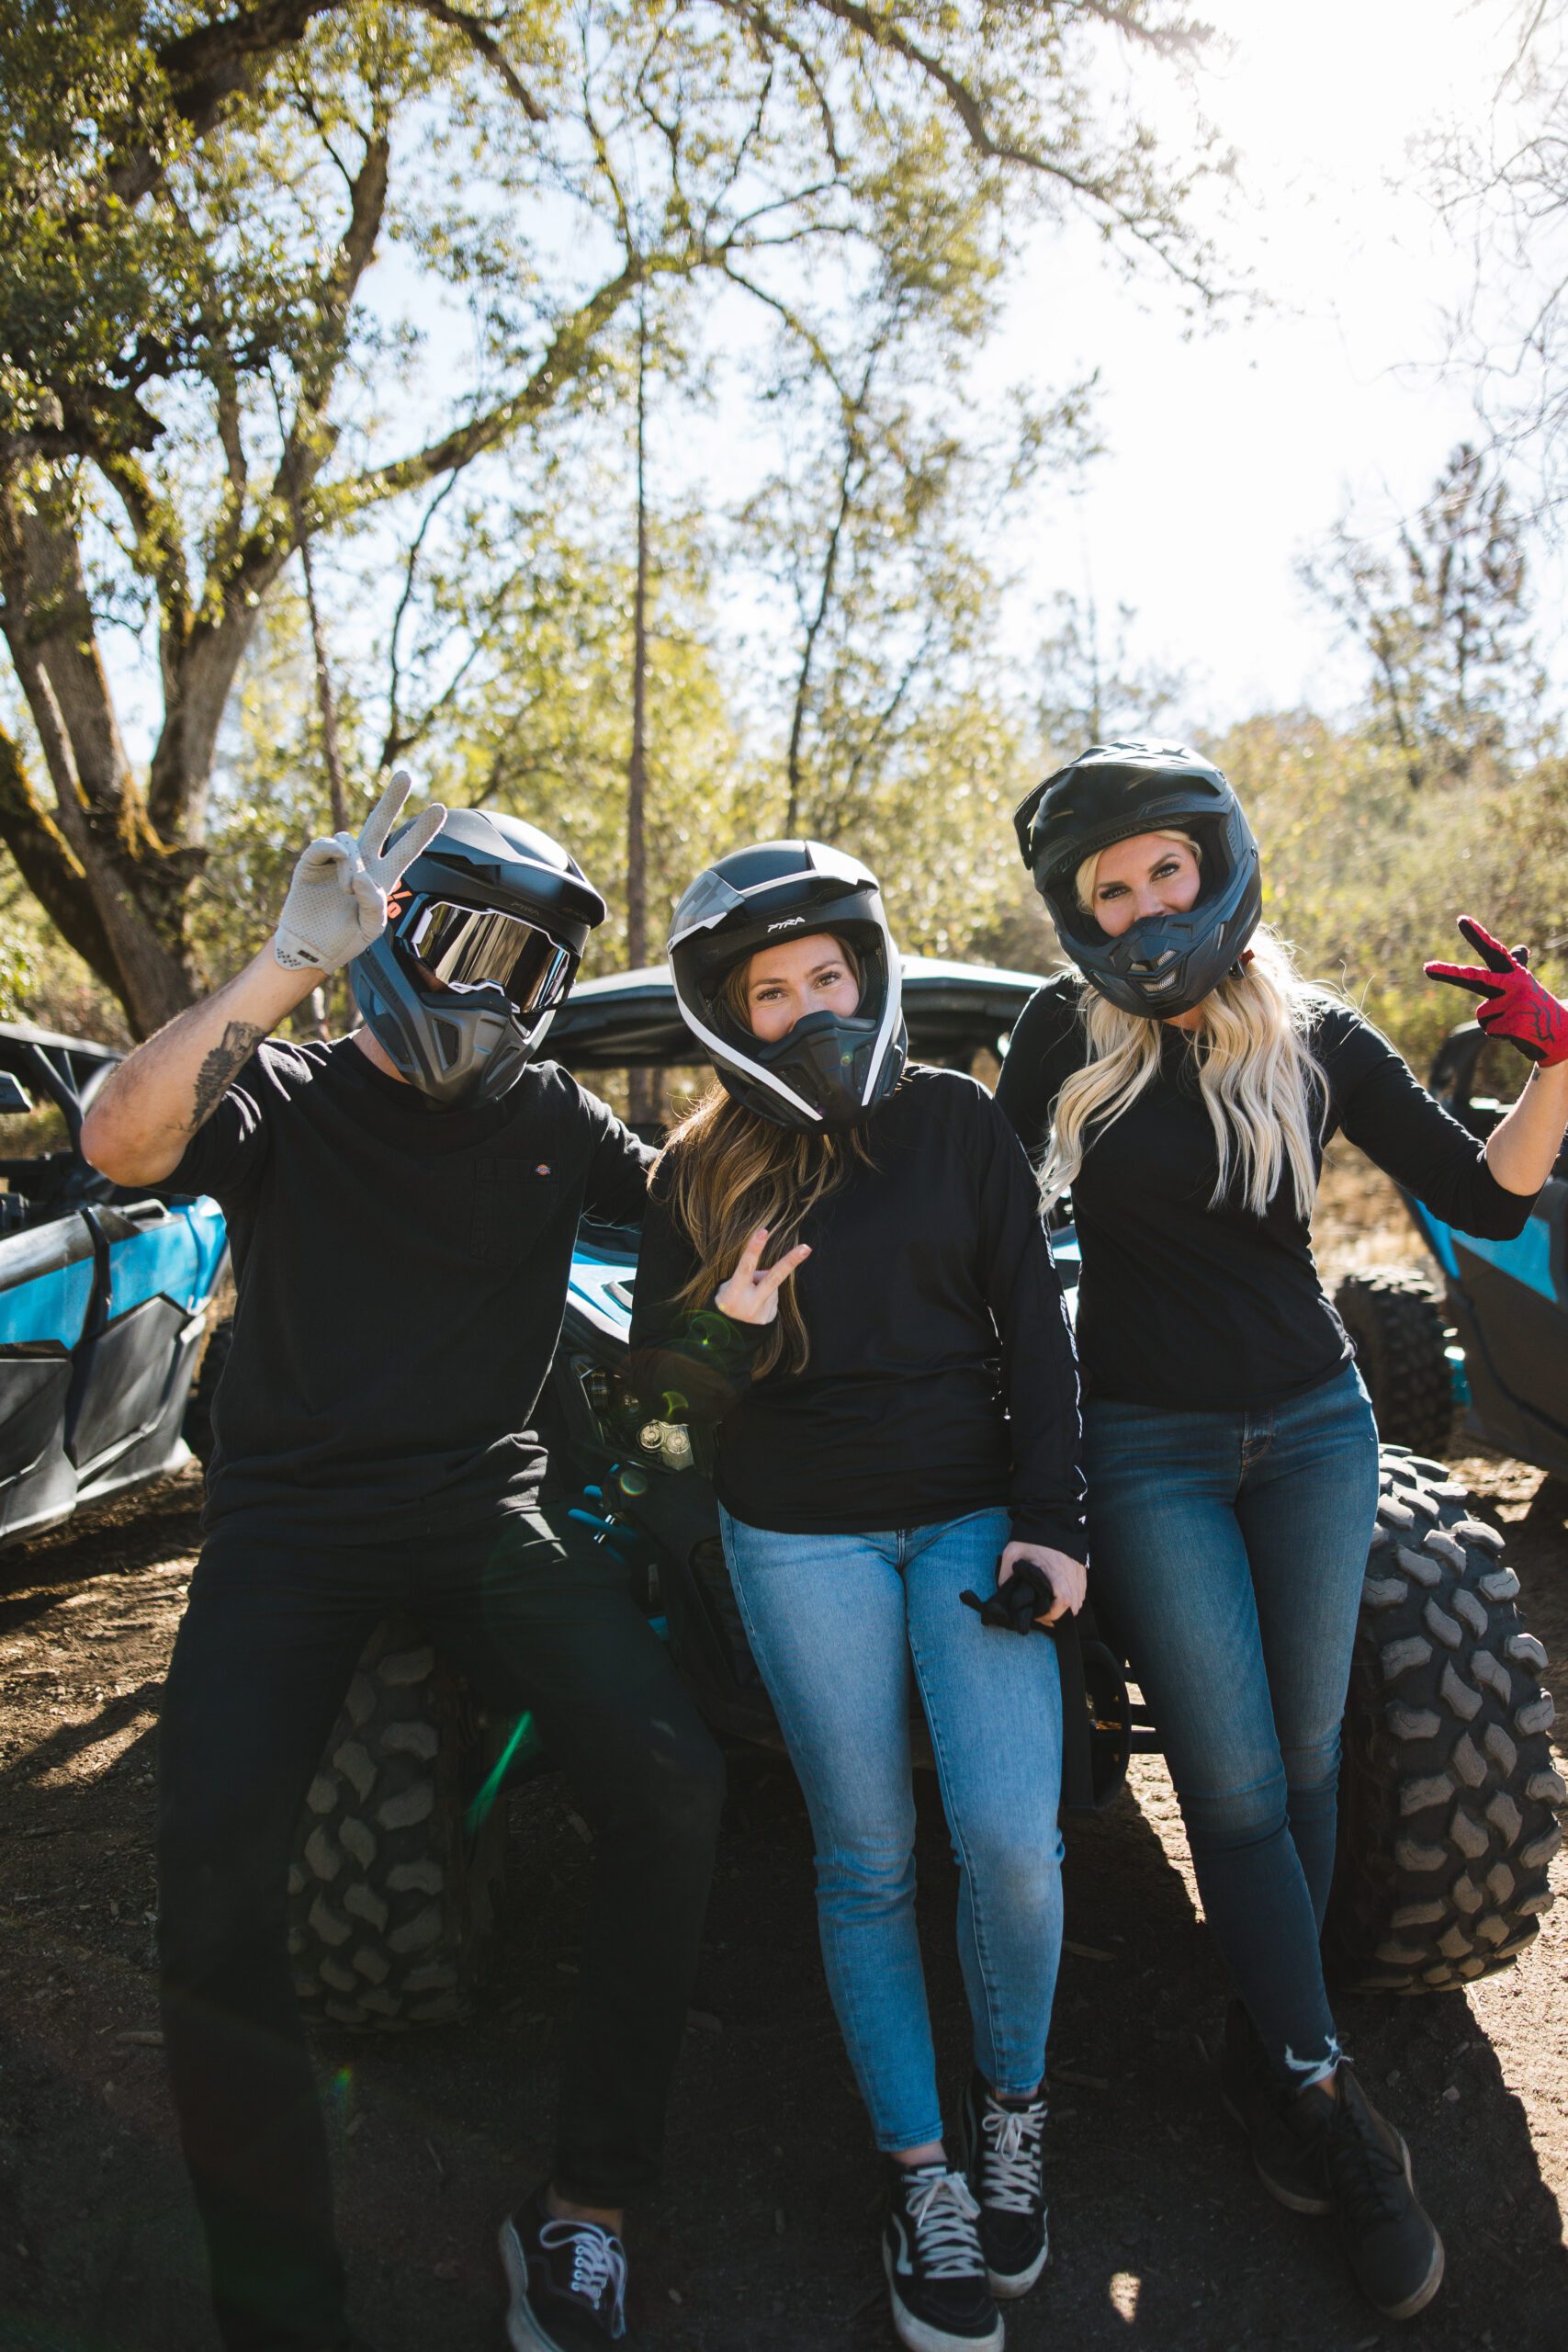 Adventure awaits in Yosemite's off-road SXS tours